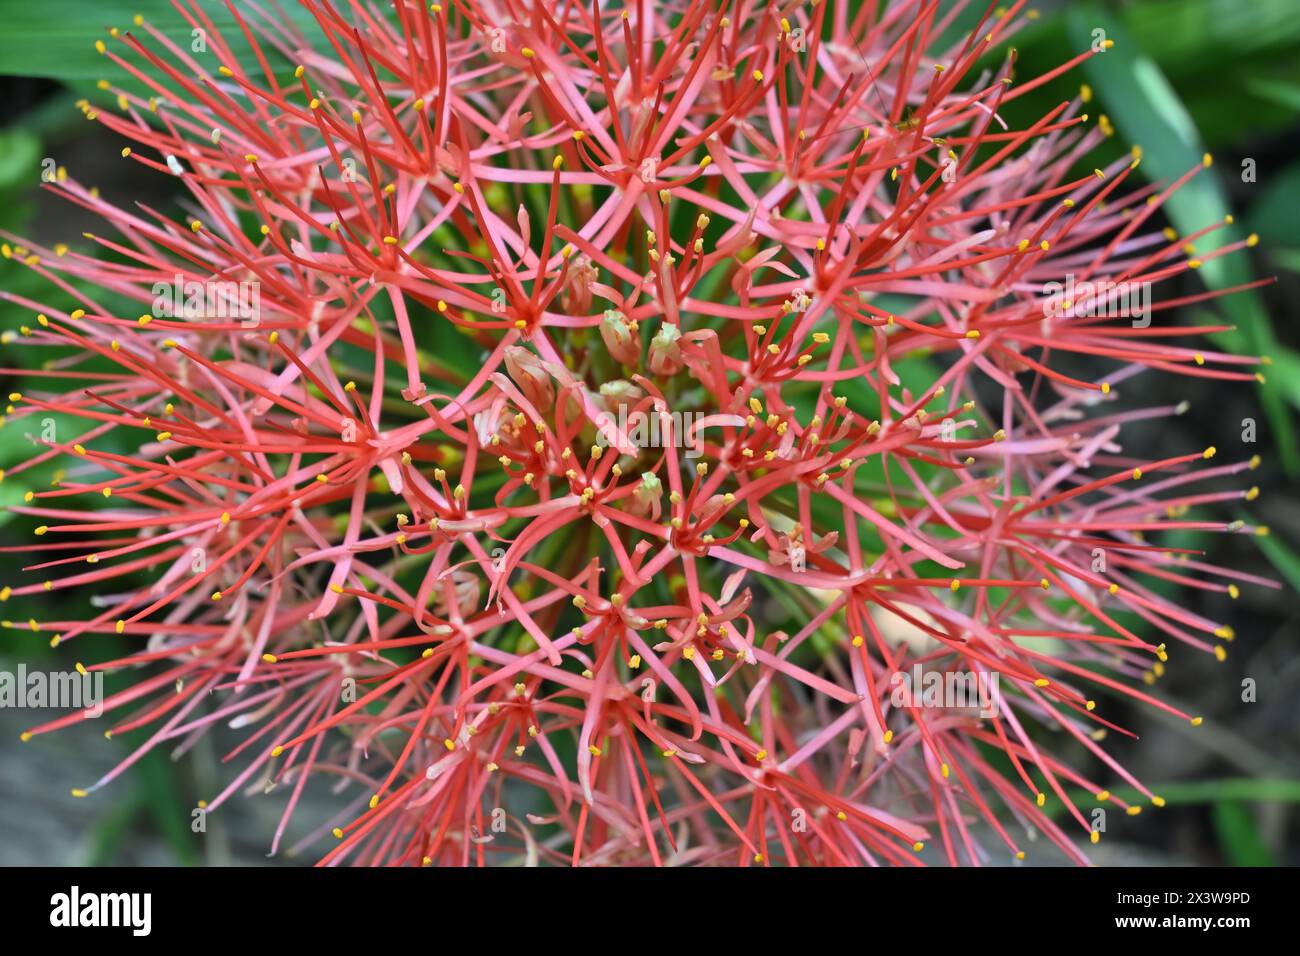 Close up view of an inflorescence of a fireball lily (Scadoxus multiflorus) plant. These flowers also known as the blood lily, ball lily and blood flo Stock Photo